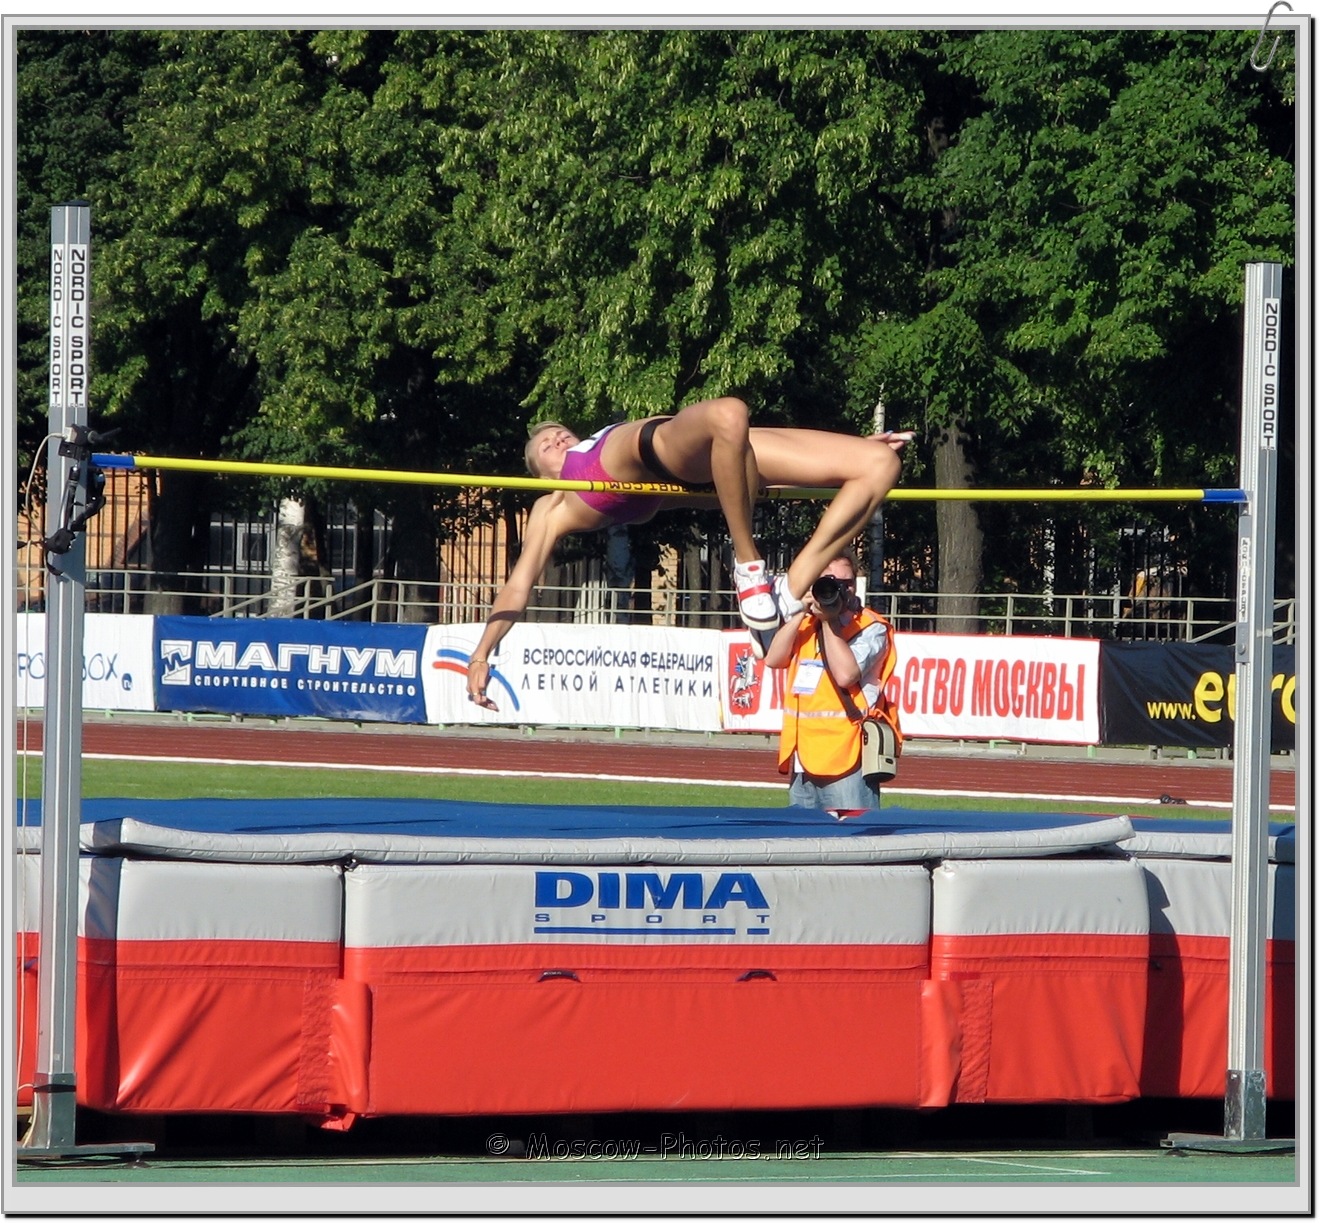 Fosbury Flop Technique at Moscow Athletics Open 2010 